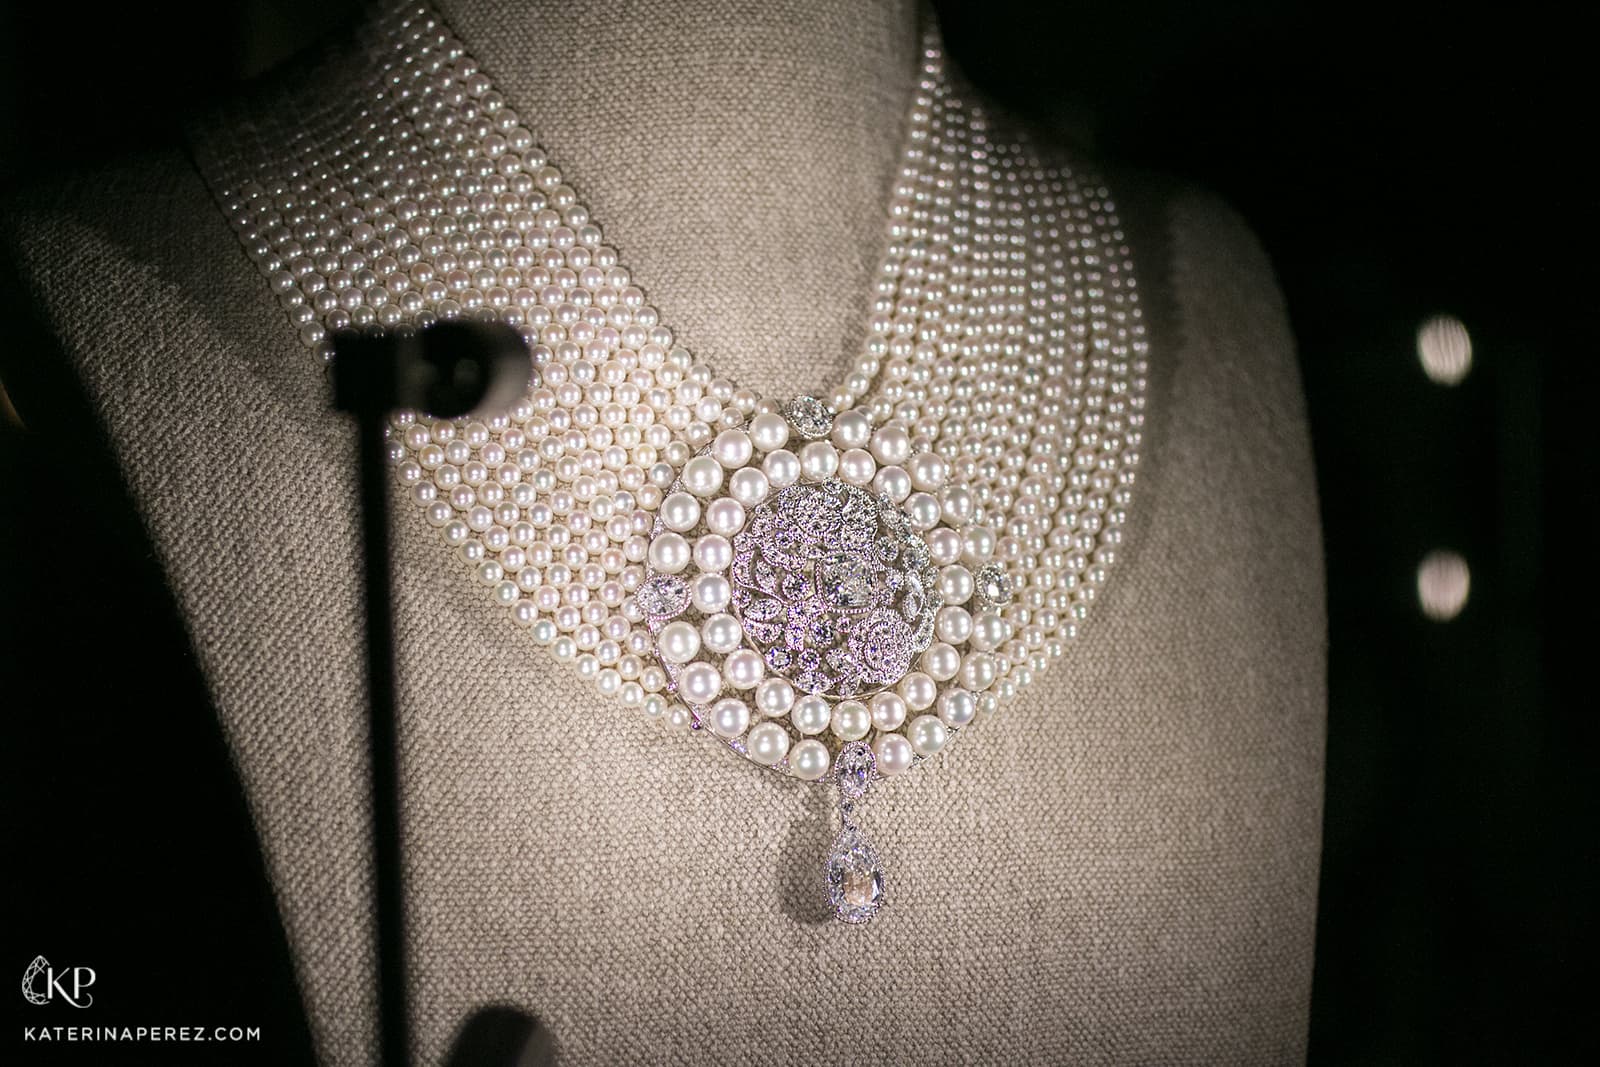 Chanel 'Le Paris Russe de Chanel' collection necklace with diamonds and pearls in white gold